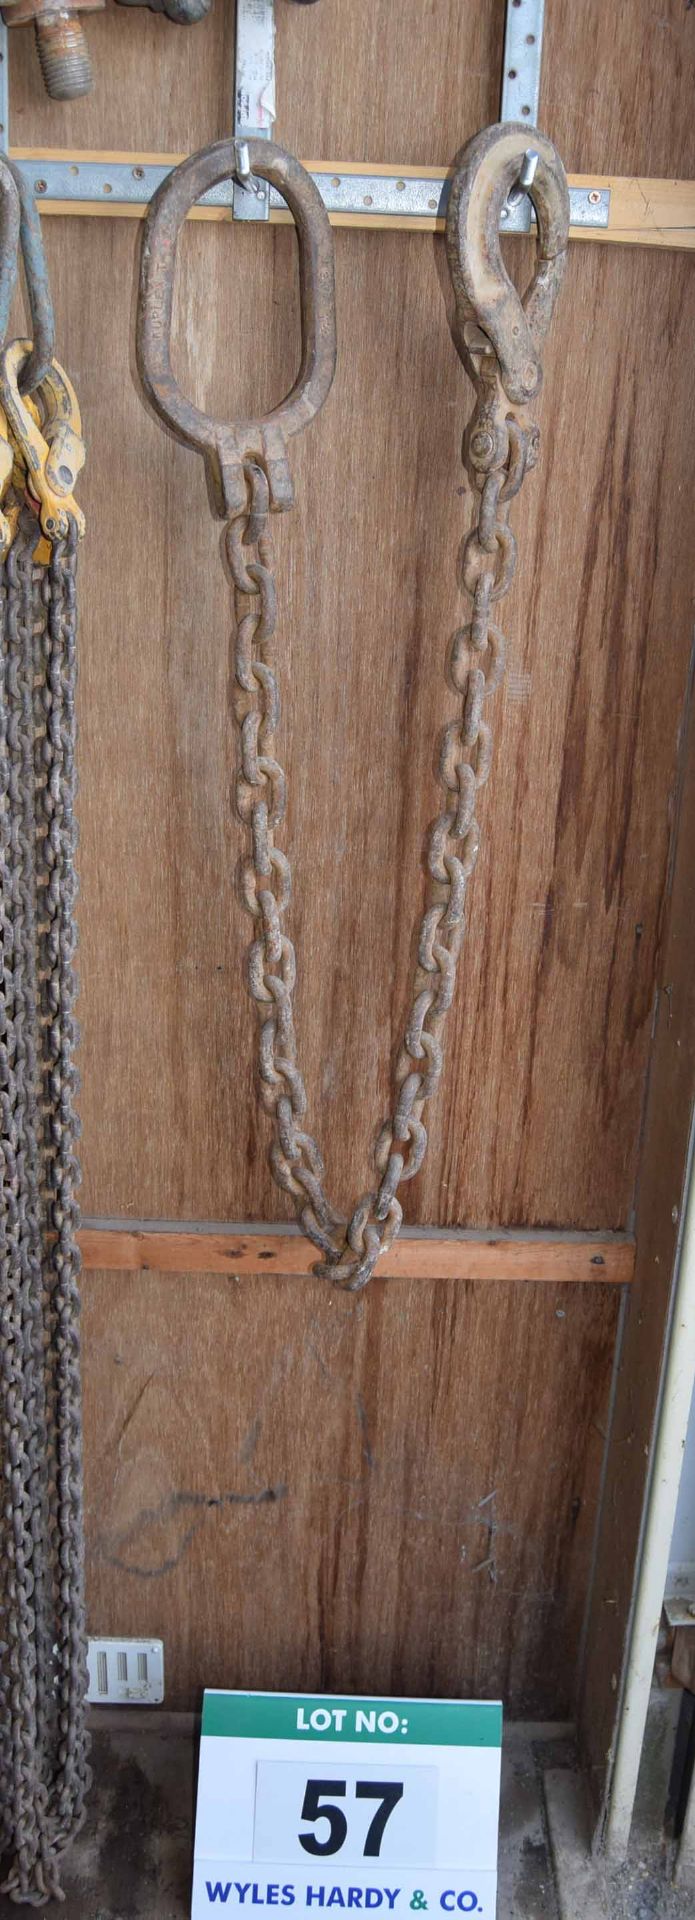 An Approx. 1500mm Heavy Lifting/Towing Chain with fitted Ring To One End and Sprung Latch Hook to